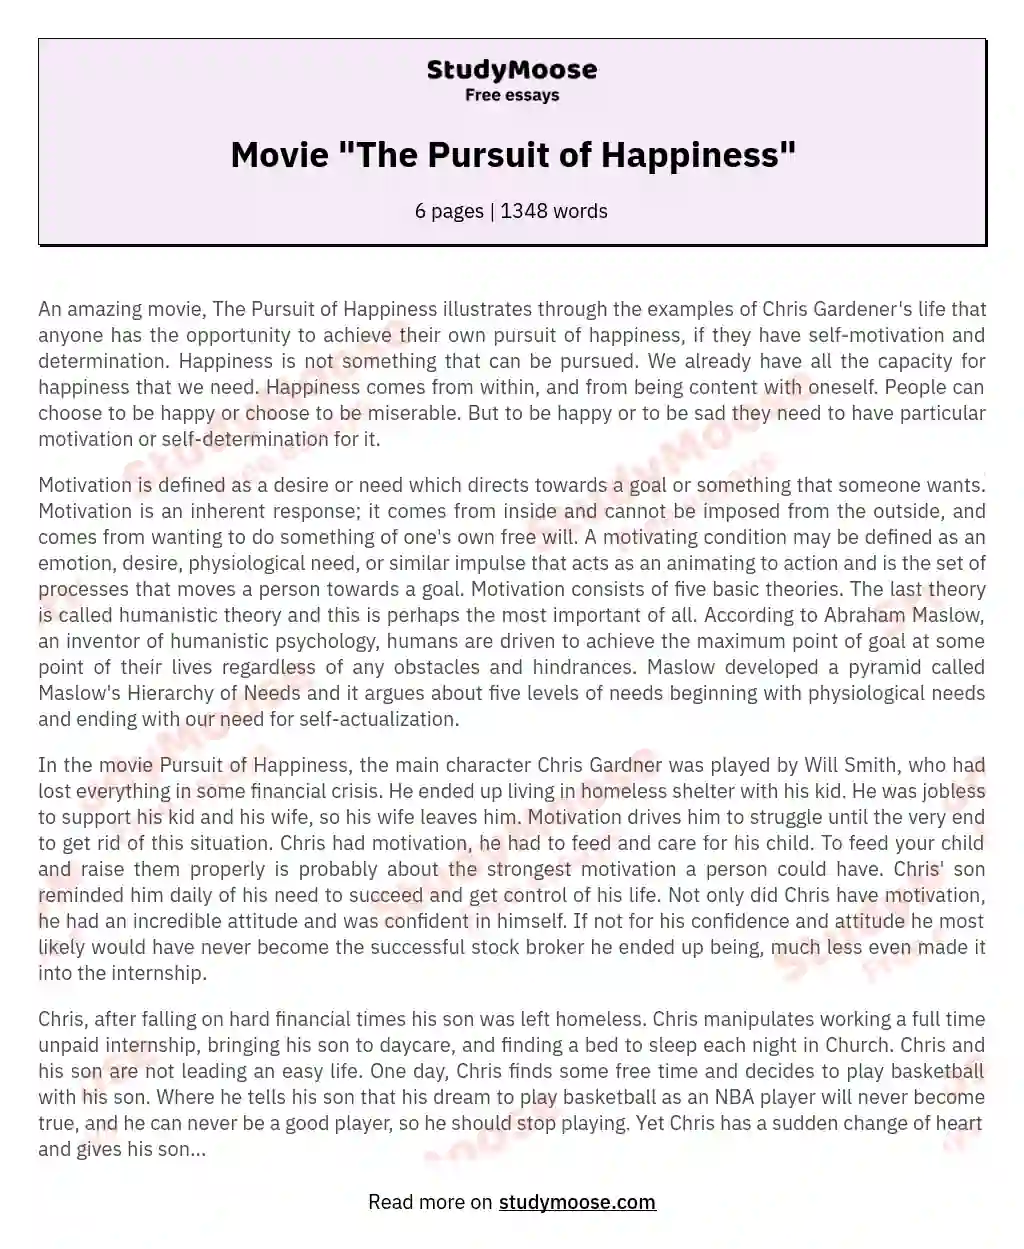 Movie "The Pursuit of Happiness" essay